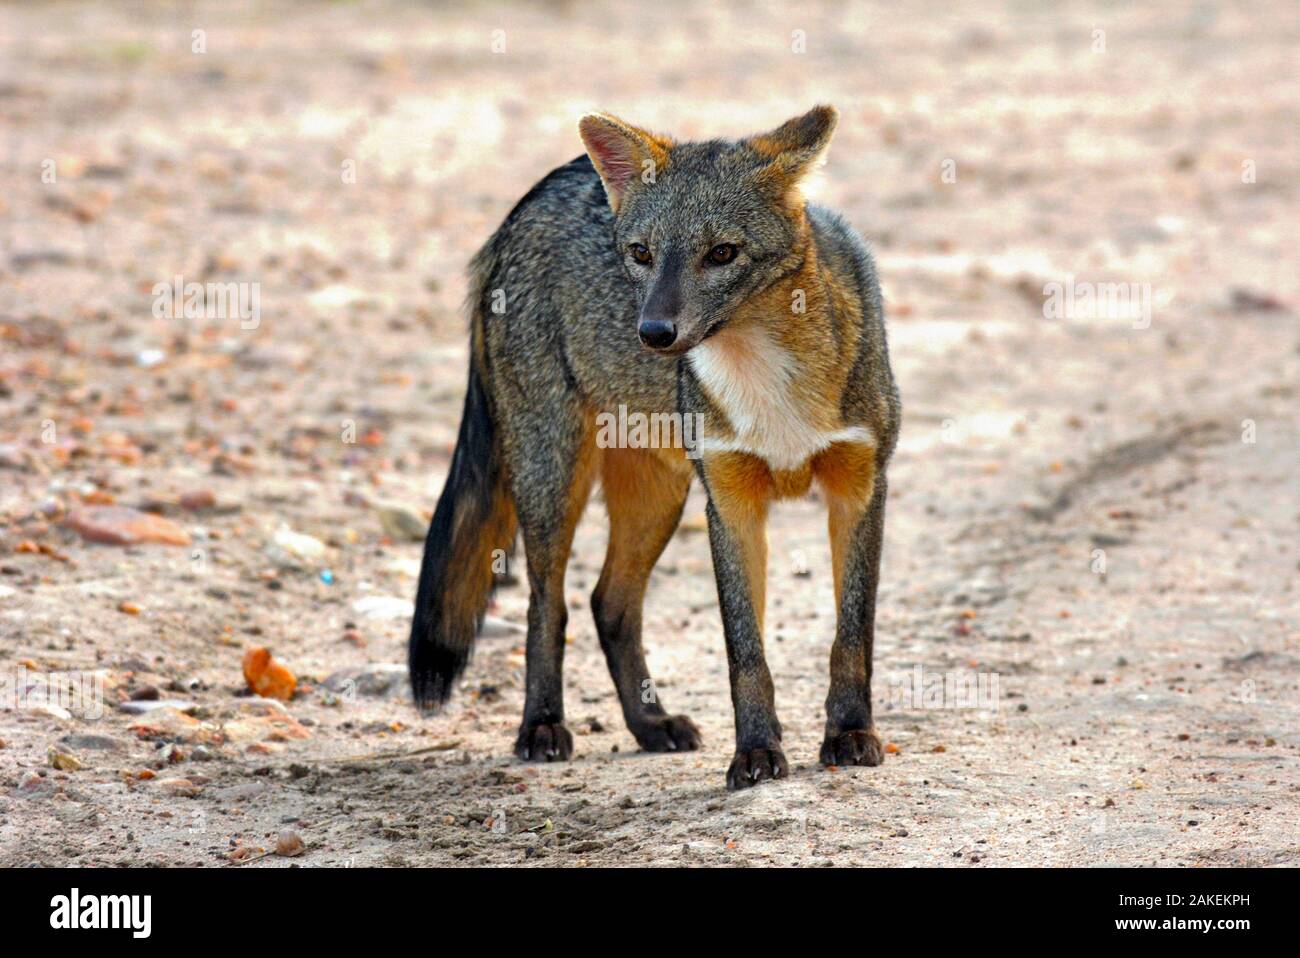 Crab-eating fox (Cerdocyon thous) Kaa-Lya National Park, South East Bolivia. Stock Photo